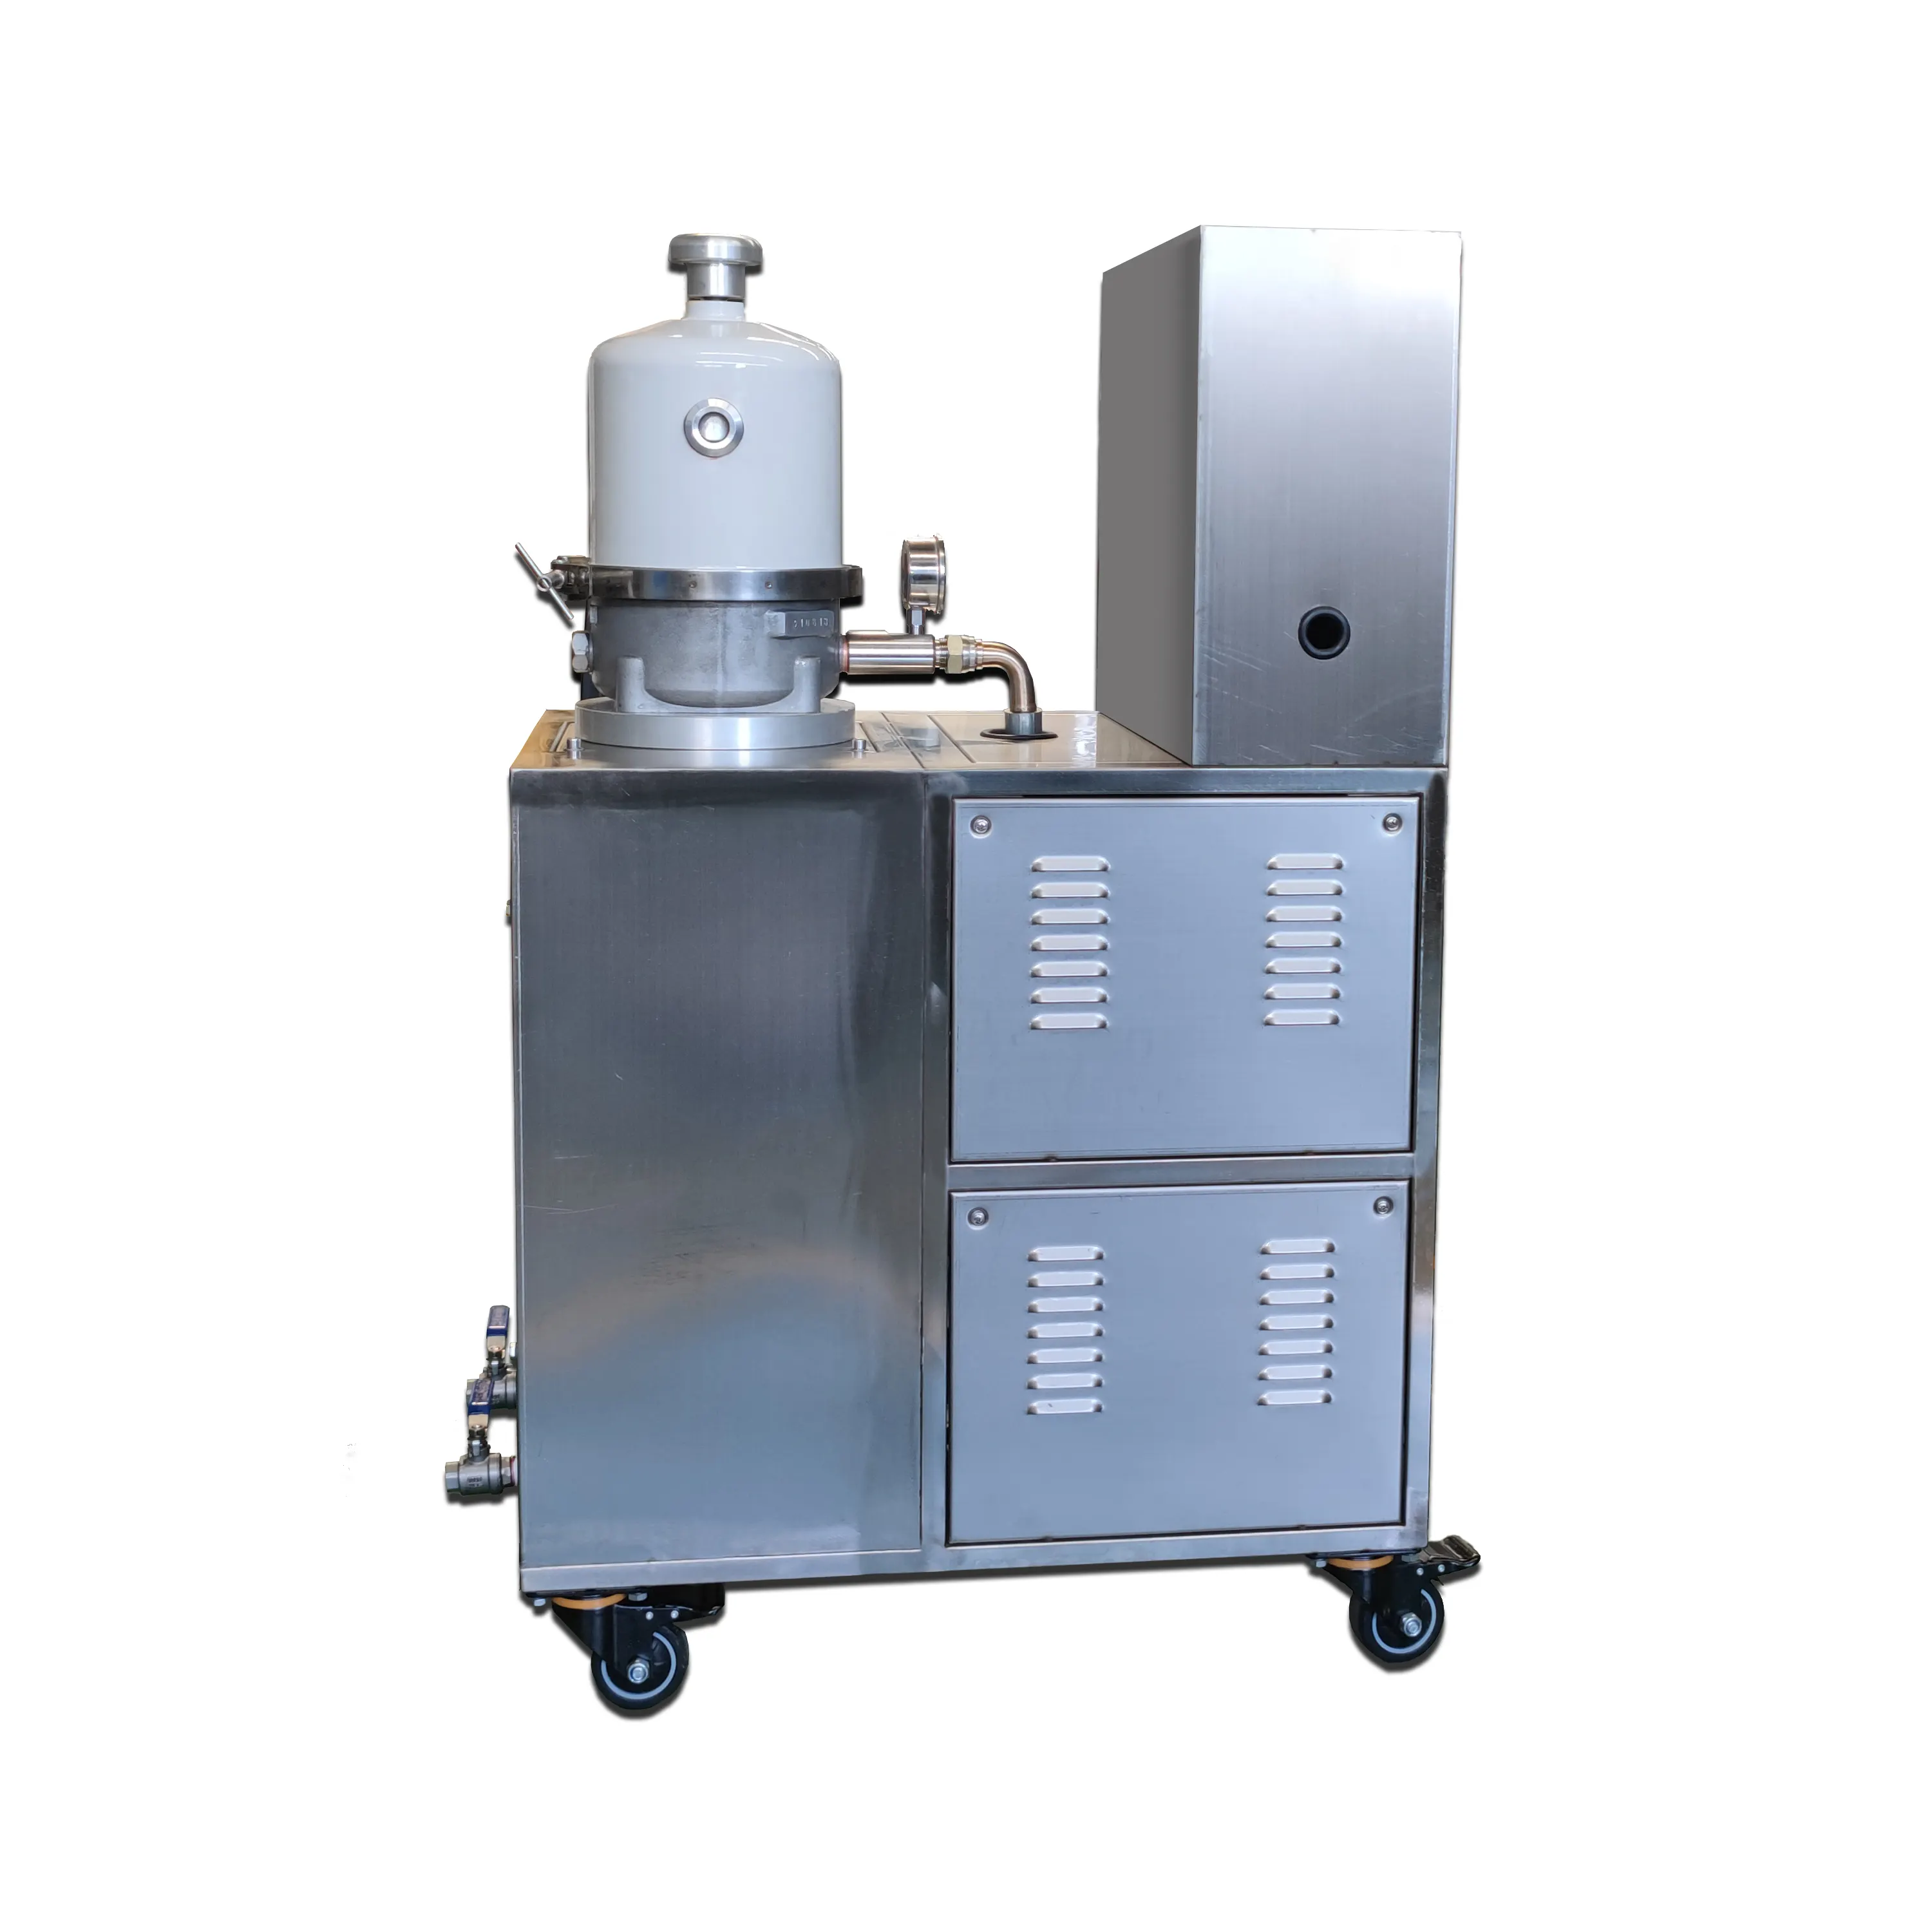 Oil purification machine for stamping oil